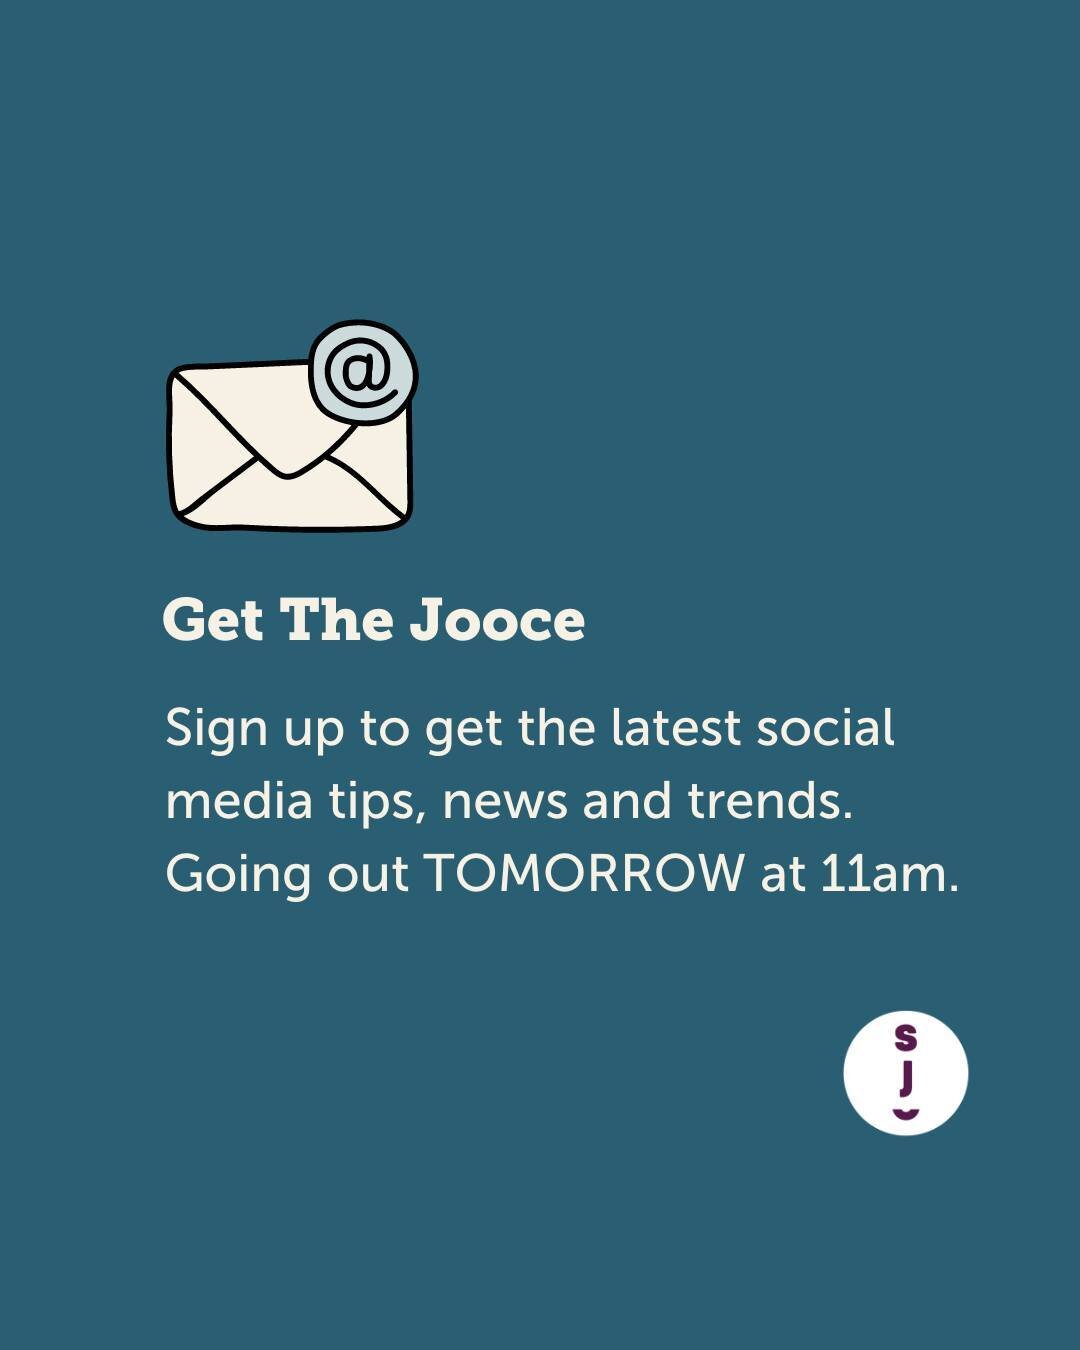 📣 The Jooce newsletter is going out TOMORROW at 11am. Sign up today to get the latest social media tips, news and trends, including a content calendar for November with all the key awareness dates. ⁠
⁠
Link in bio👆⁠
⁠
#socialjooce #thesocialjoocero